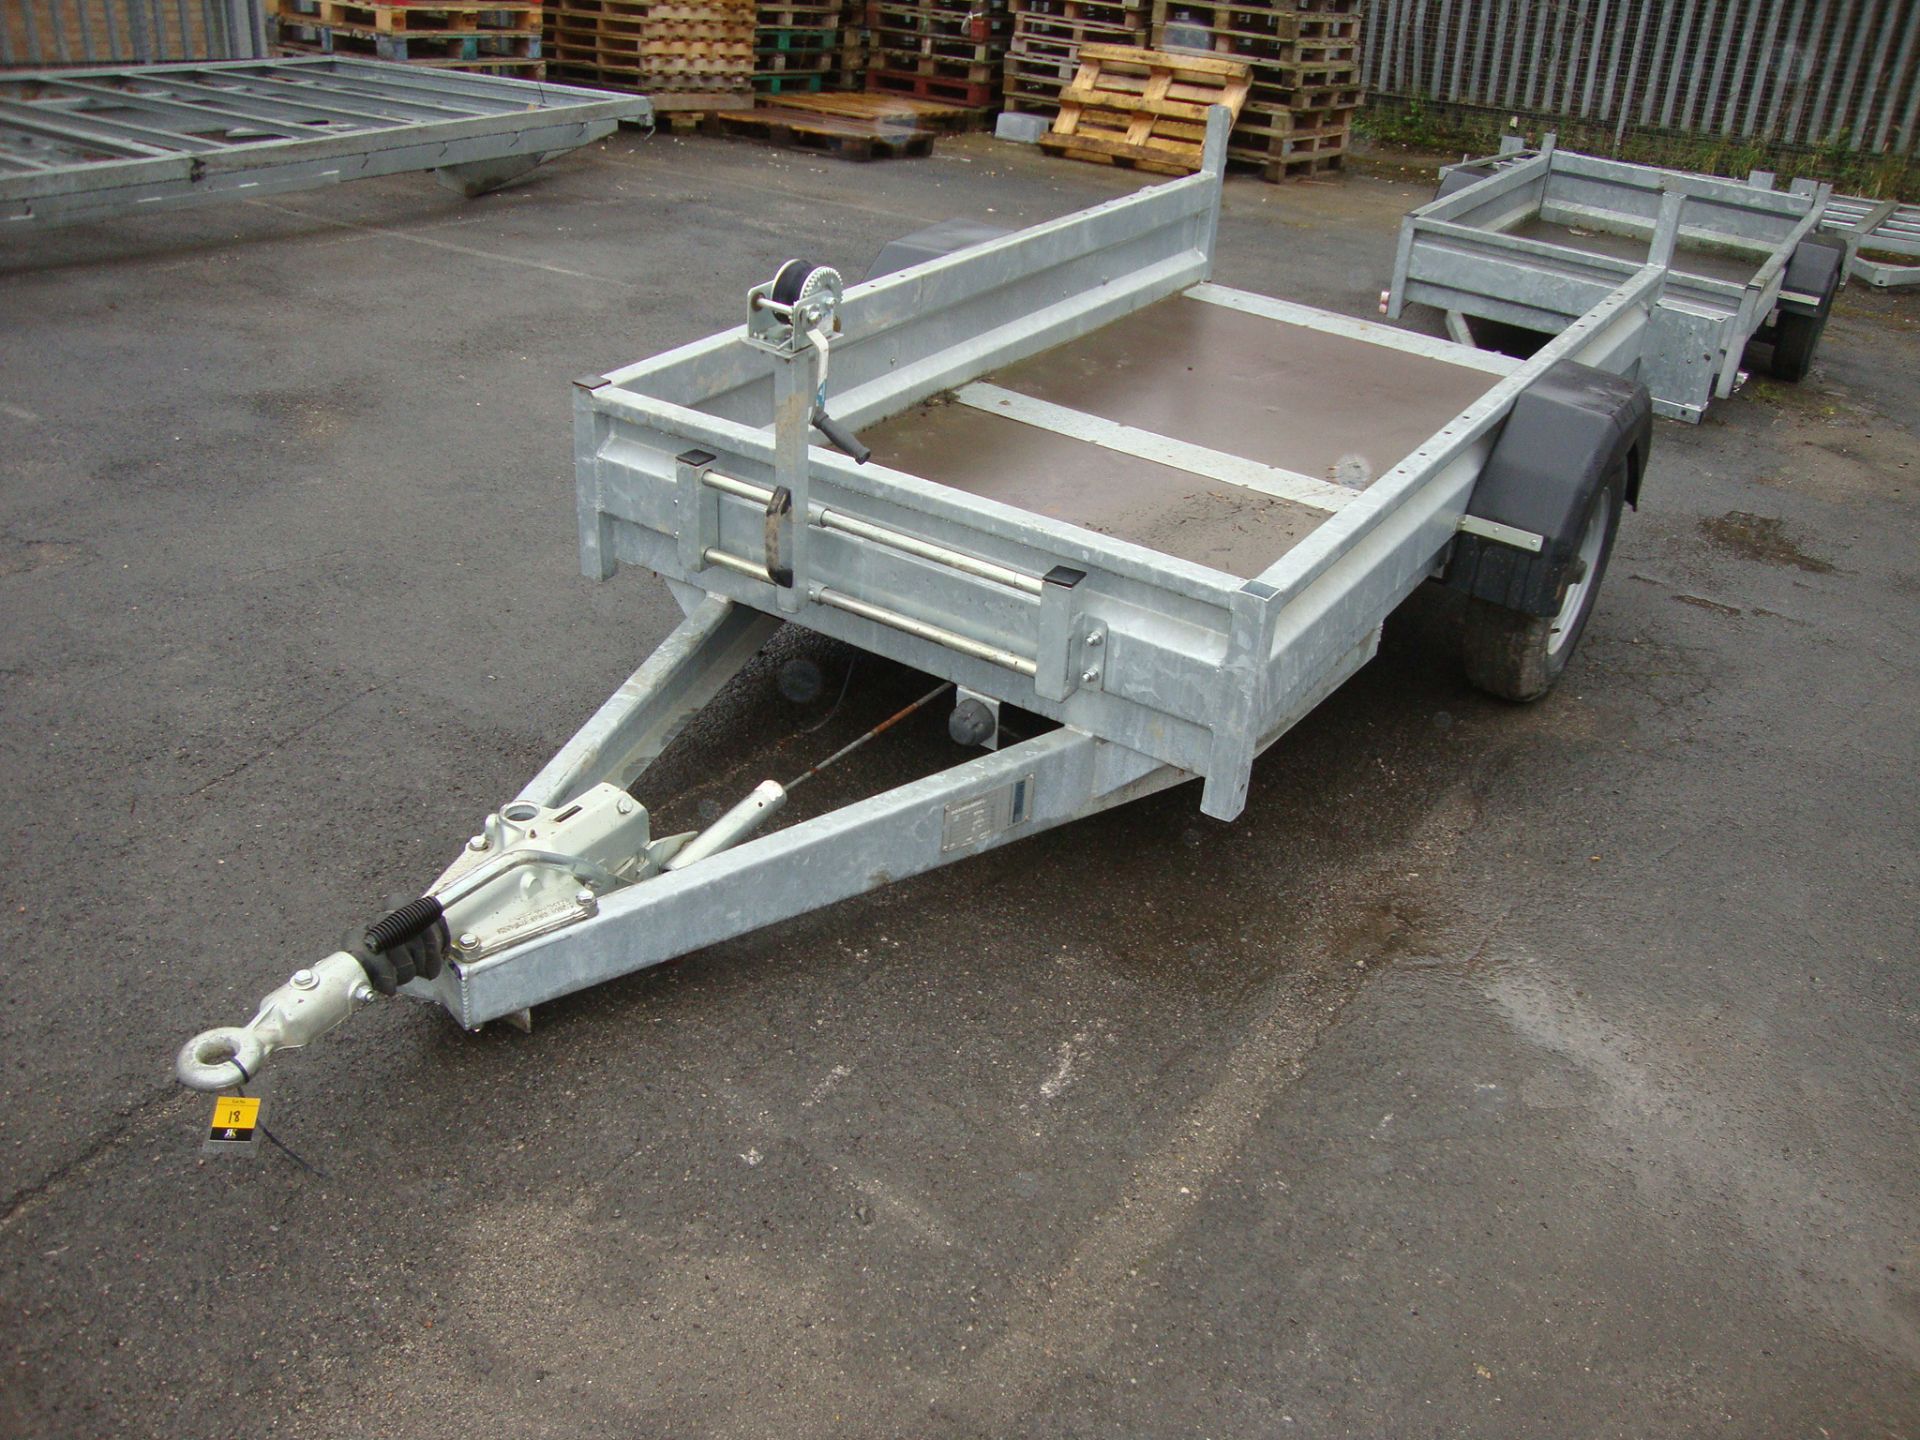 Single axle trailer with open rear (suitable for attaching a small drop down panel or a large ramp),